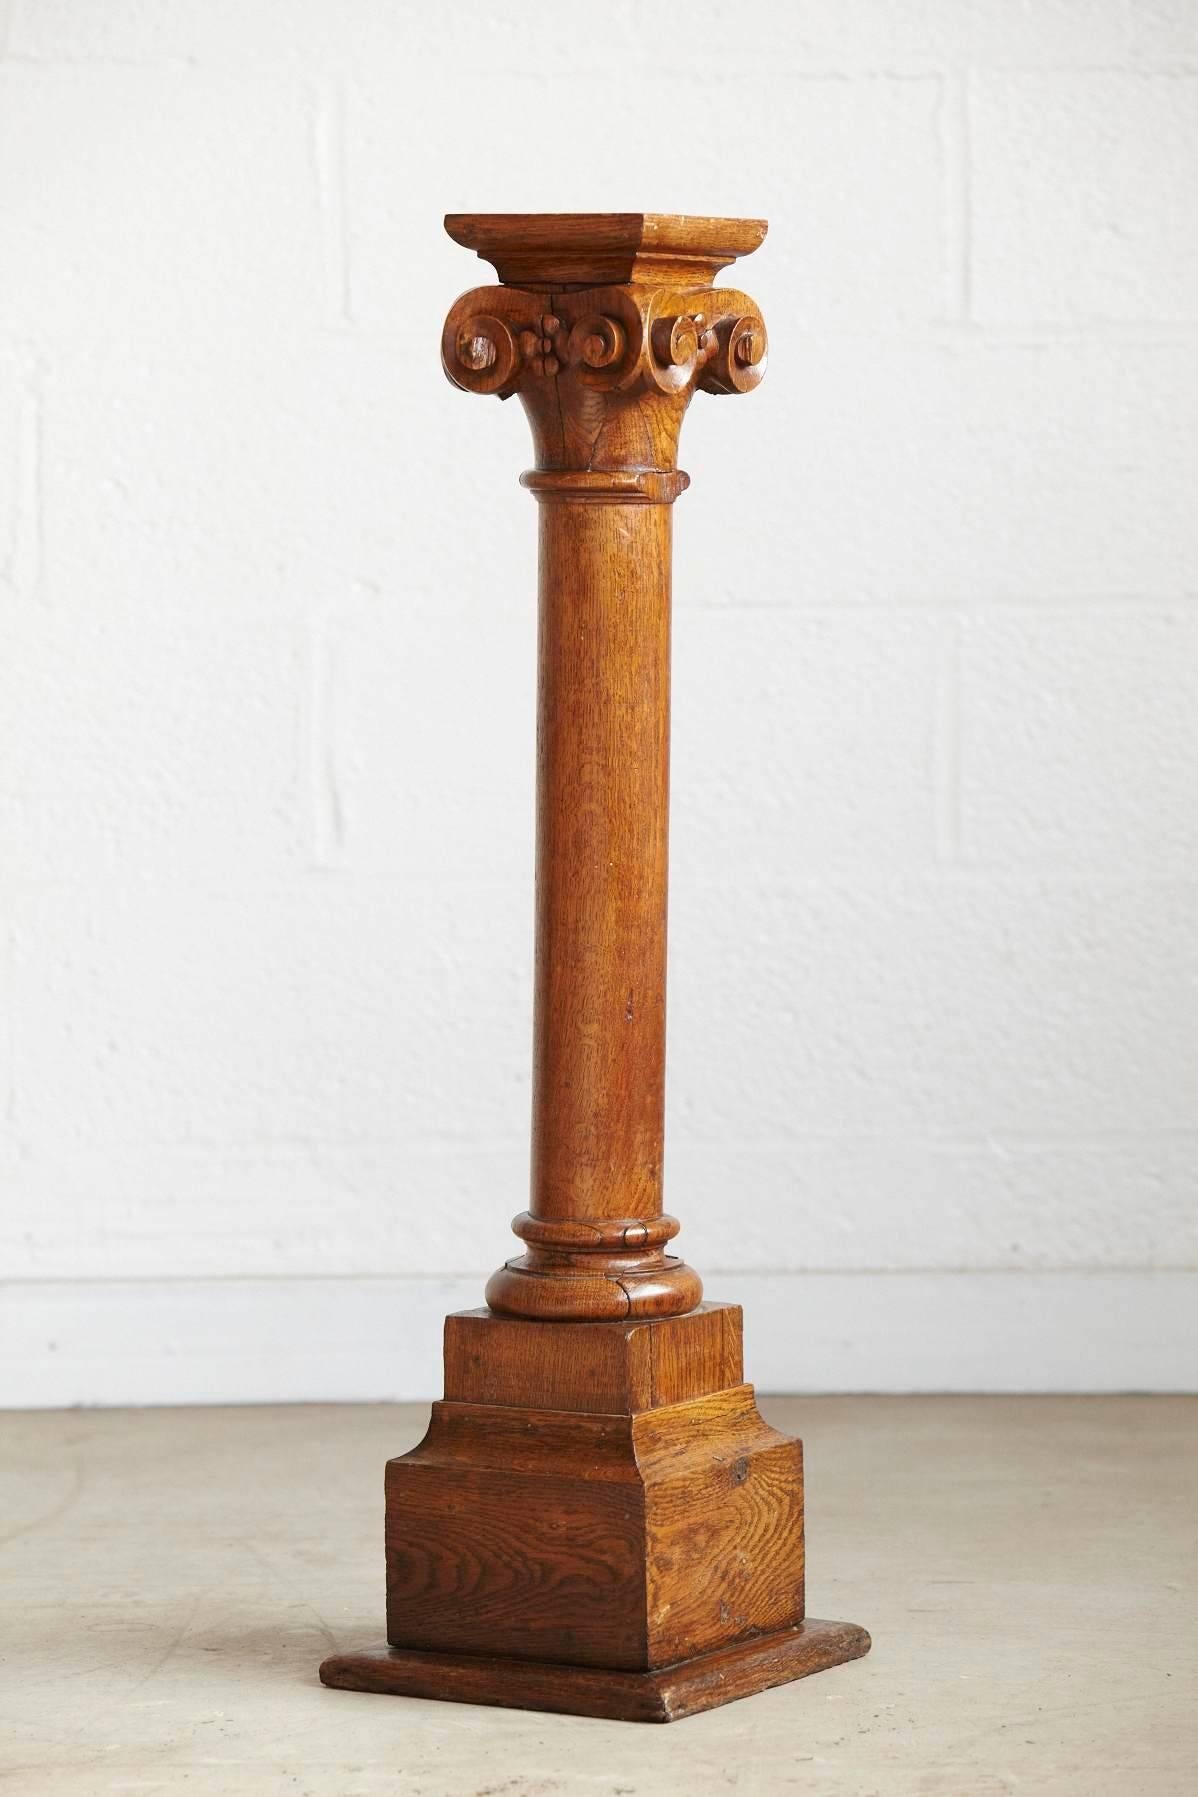 Antique 19th century oak Corinthian style pedestal or column.
The top plate can be arranged as wished for example with a small square marble top.